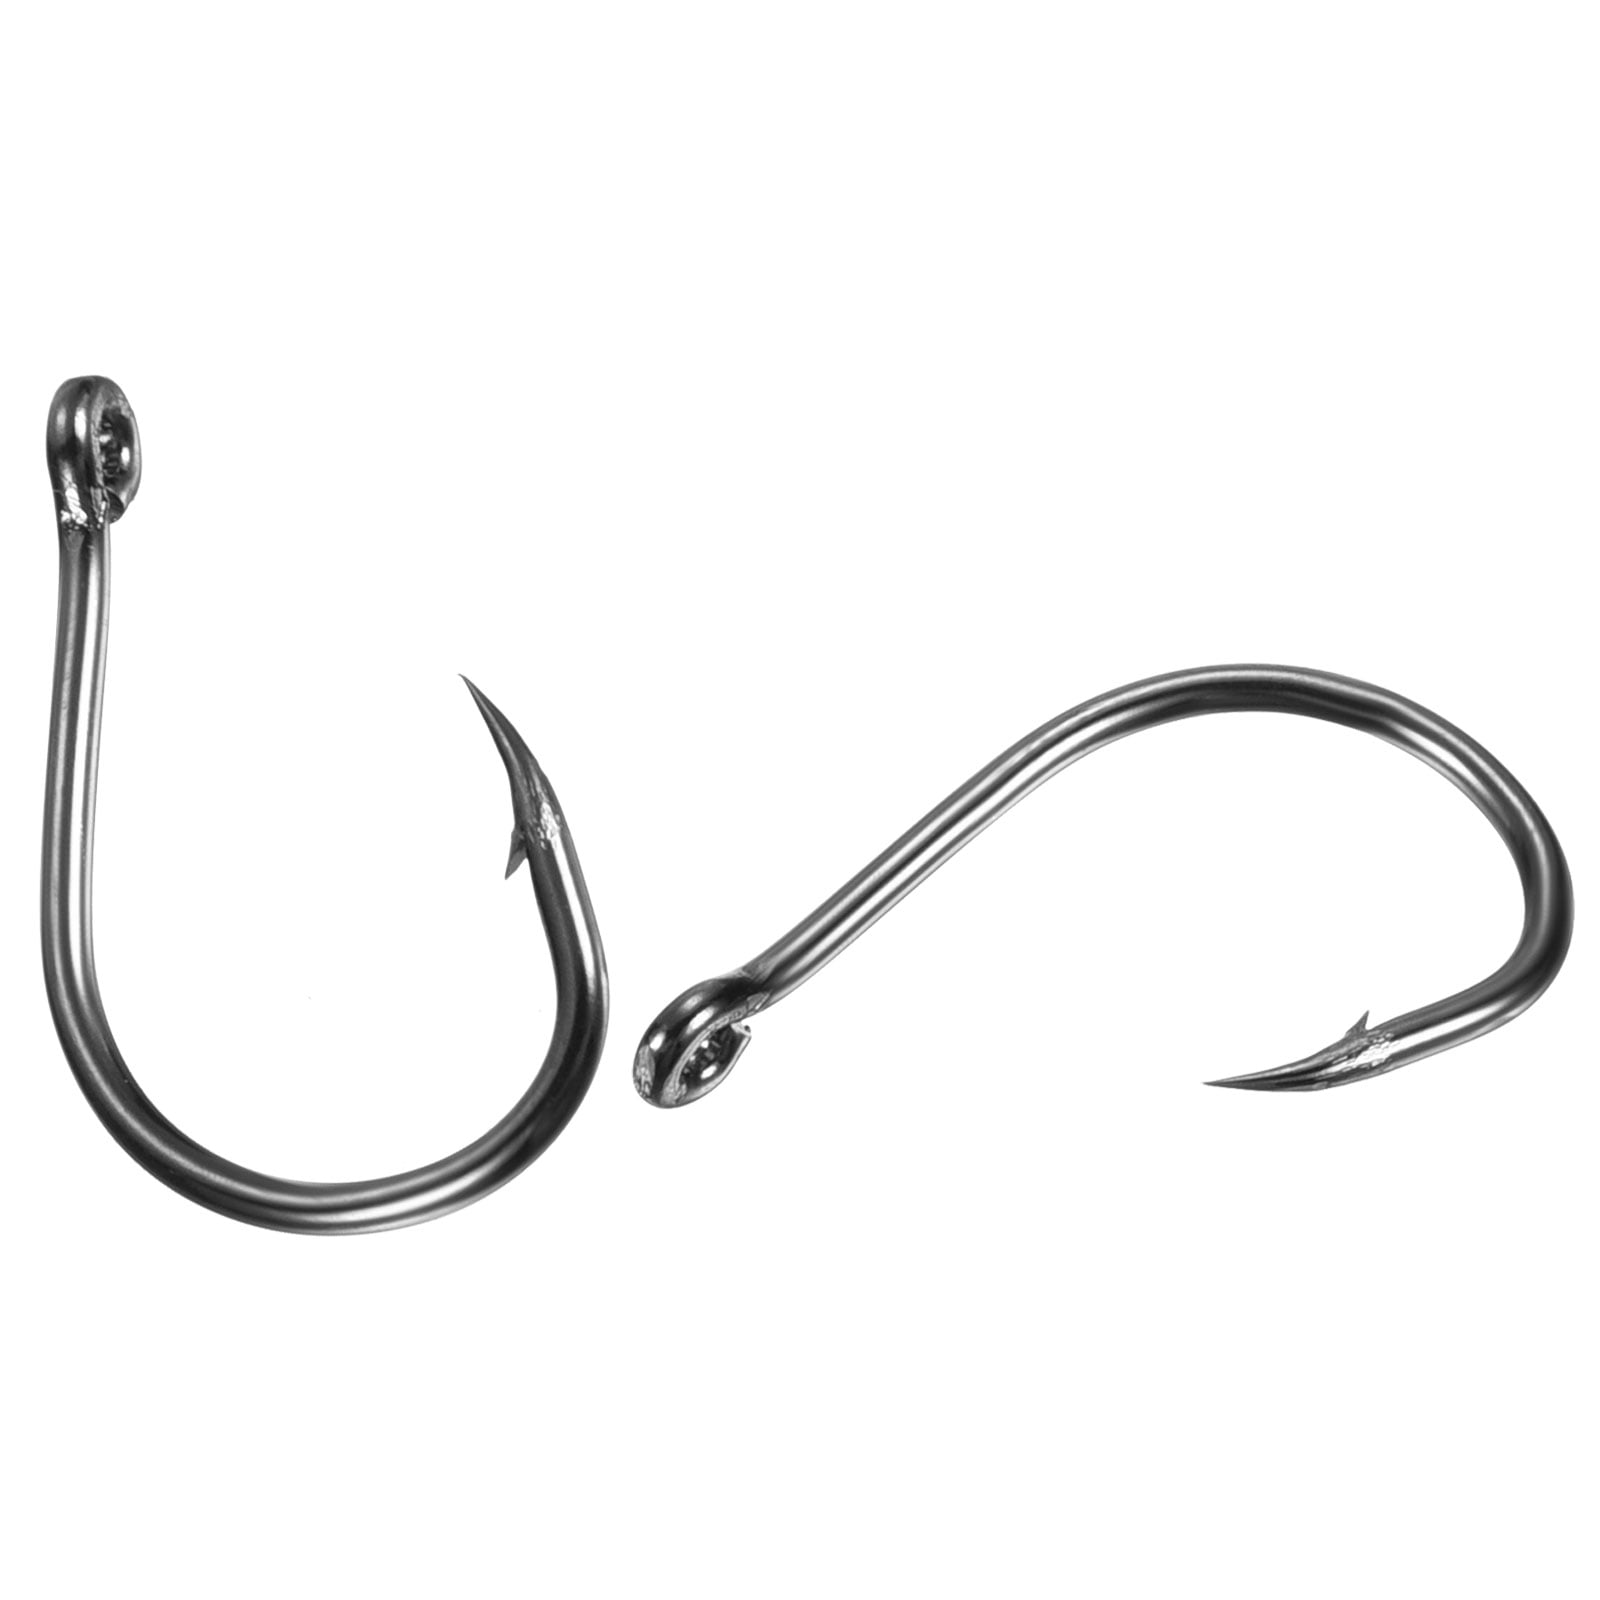 Uxcell 11# 0.45 Catfish Fishing Jig Hook High Carbon Steel with Barbs,  Black 200 Pack 